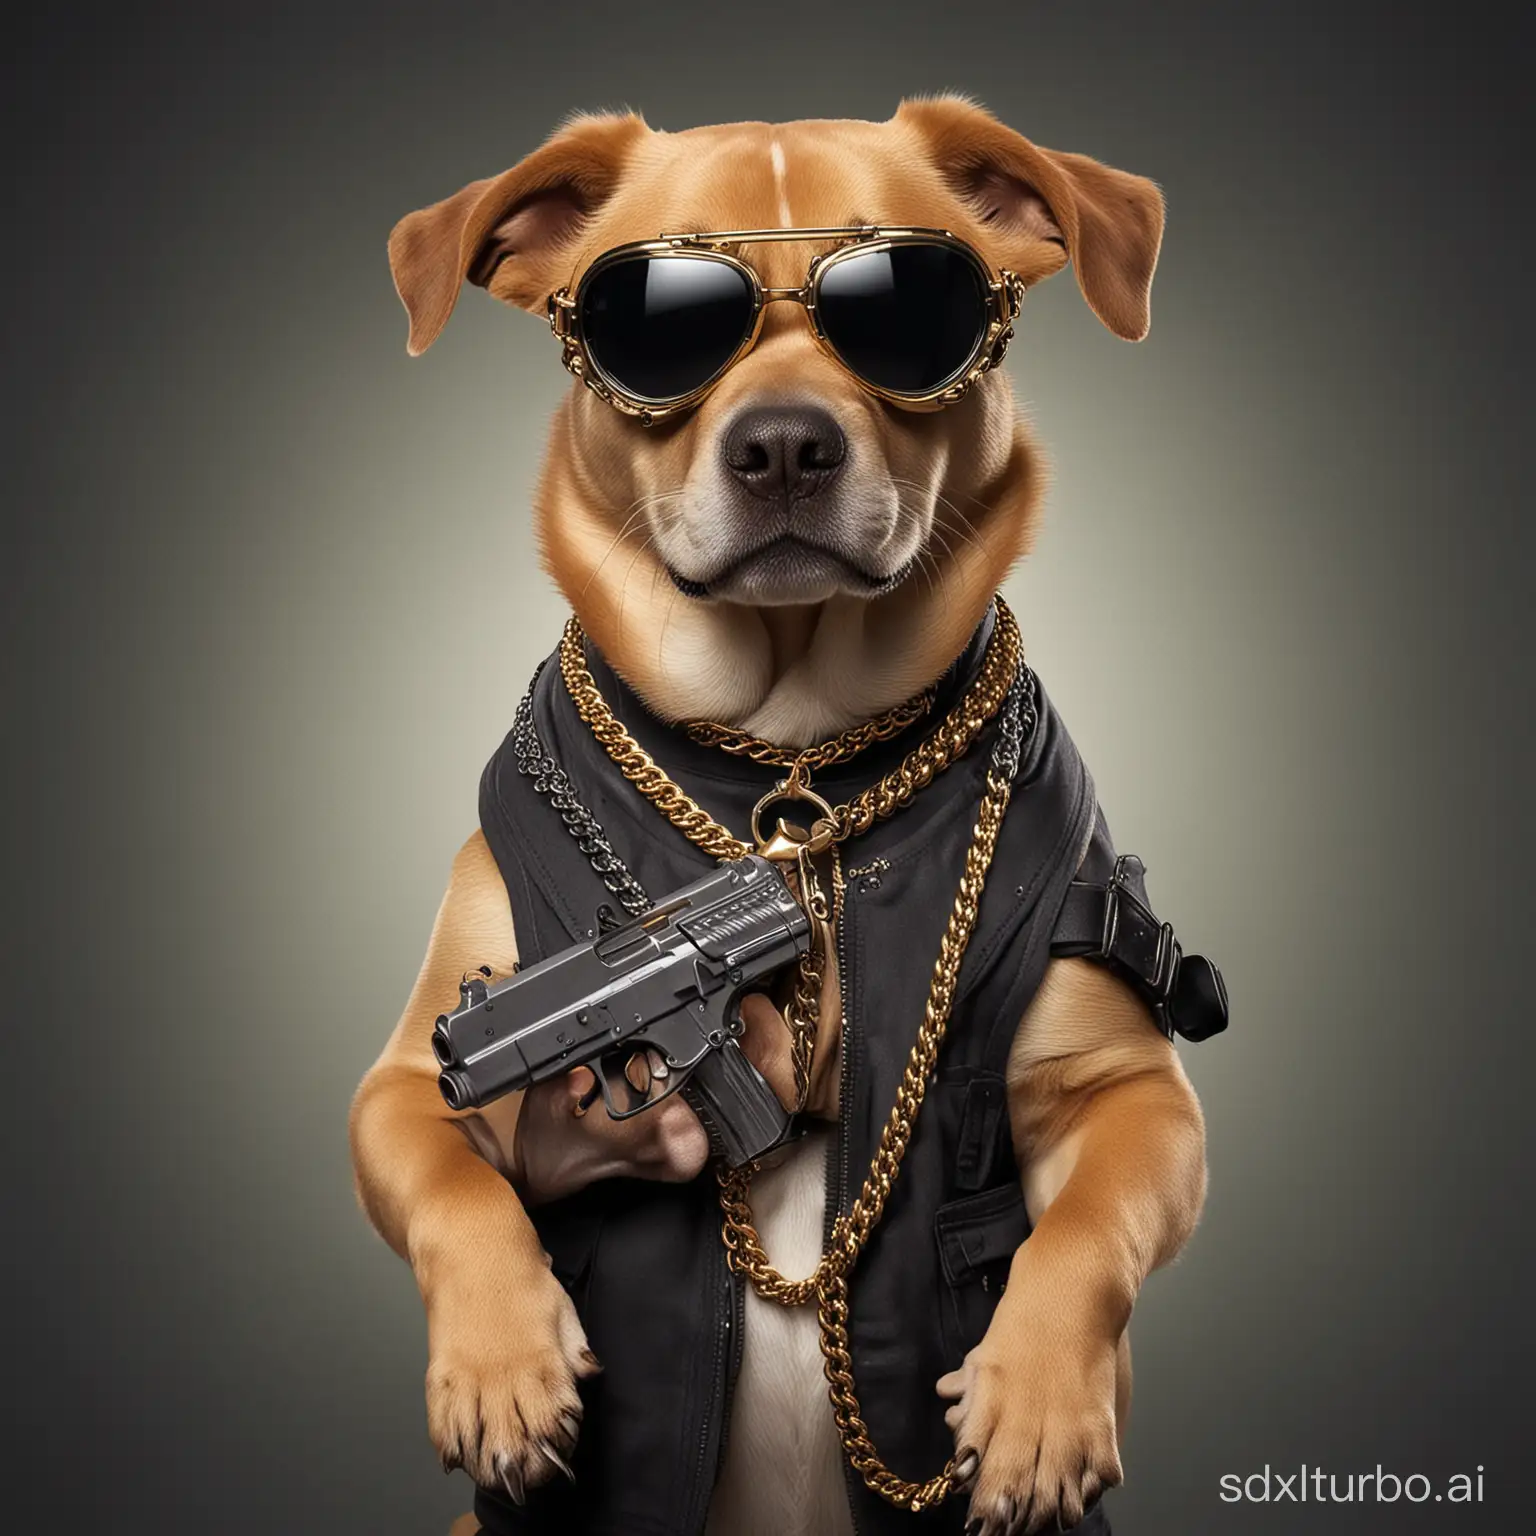 Dog holding a gun abd being a gangsta with golden chains on neck and black goggles